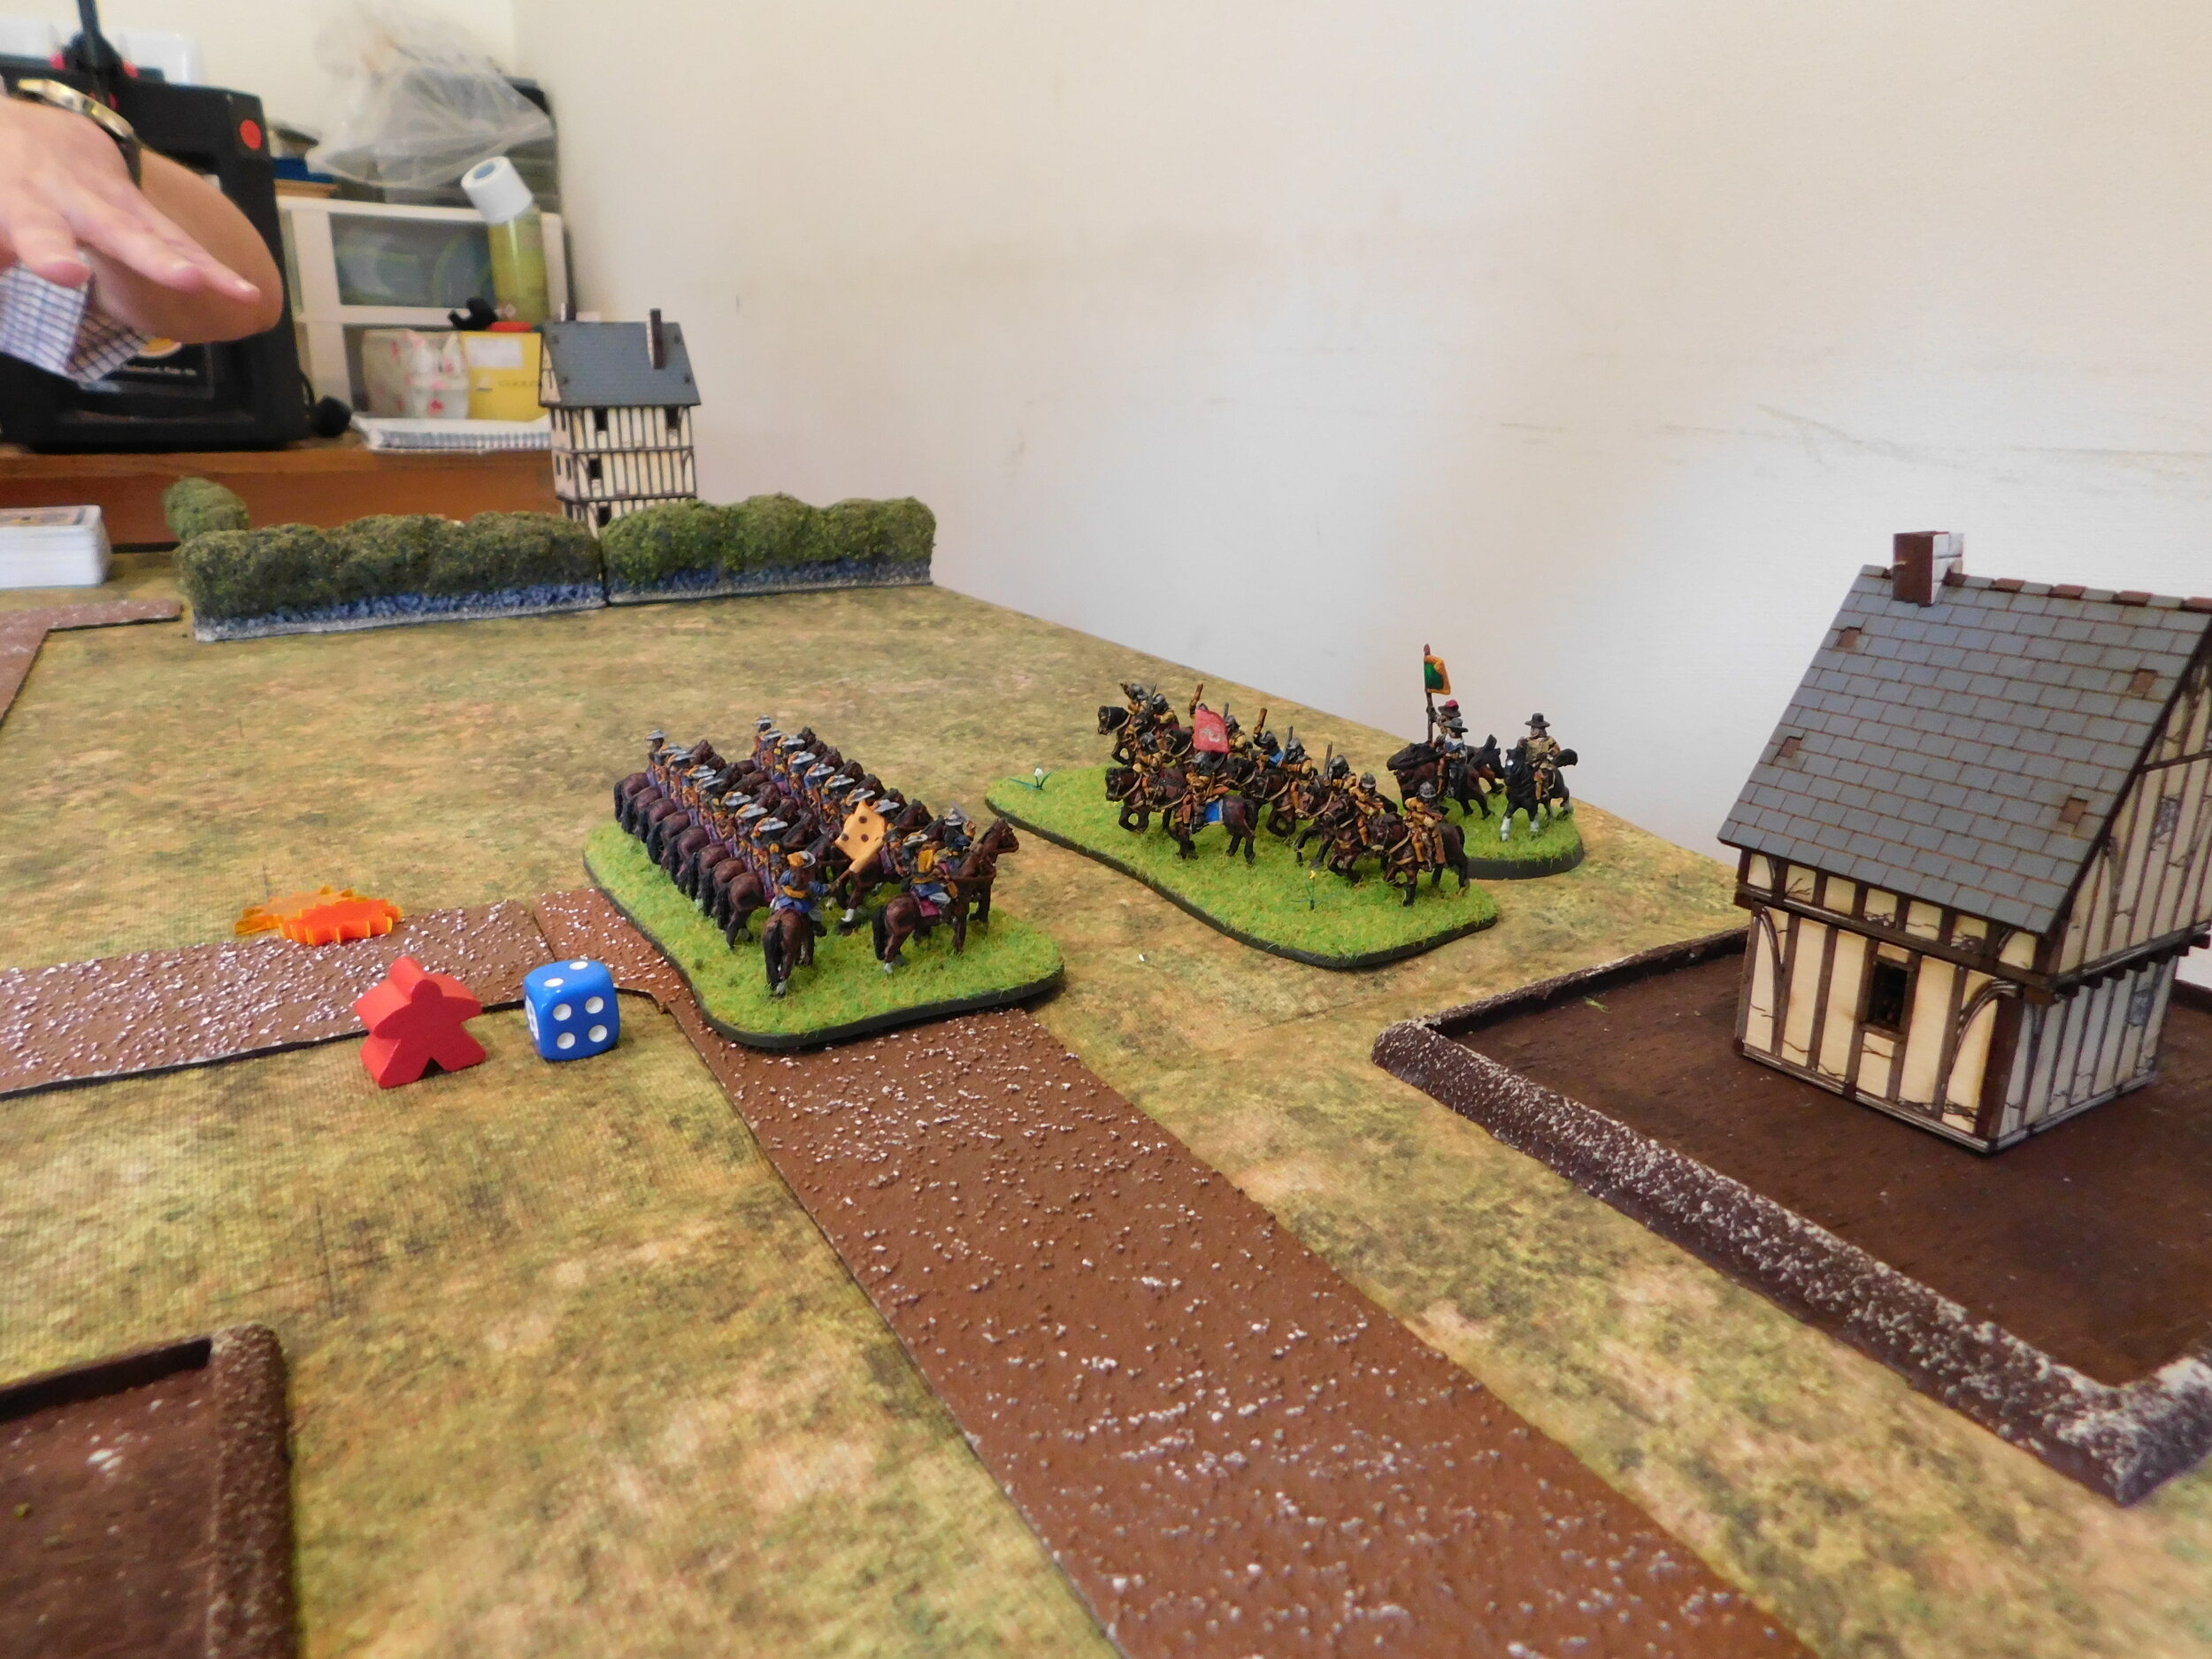 Some bits of the initial cavalry clash were still carrying on.